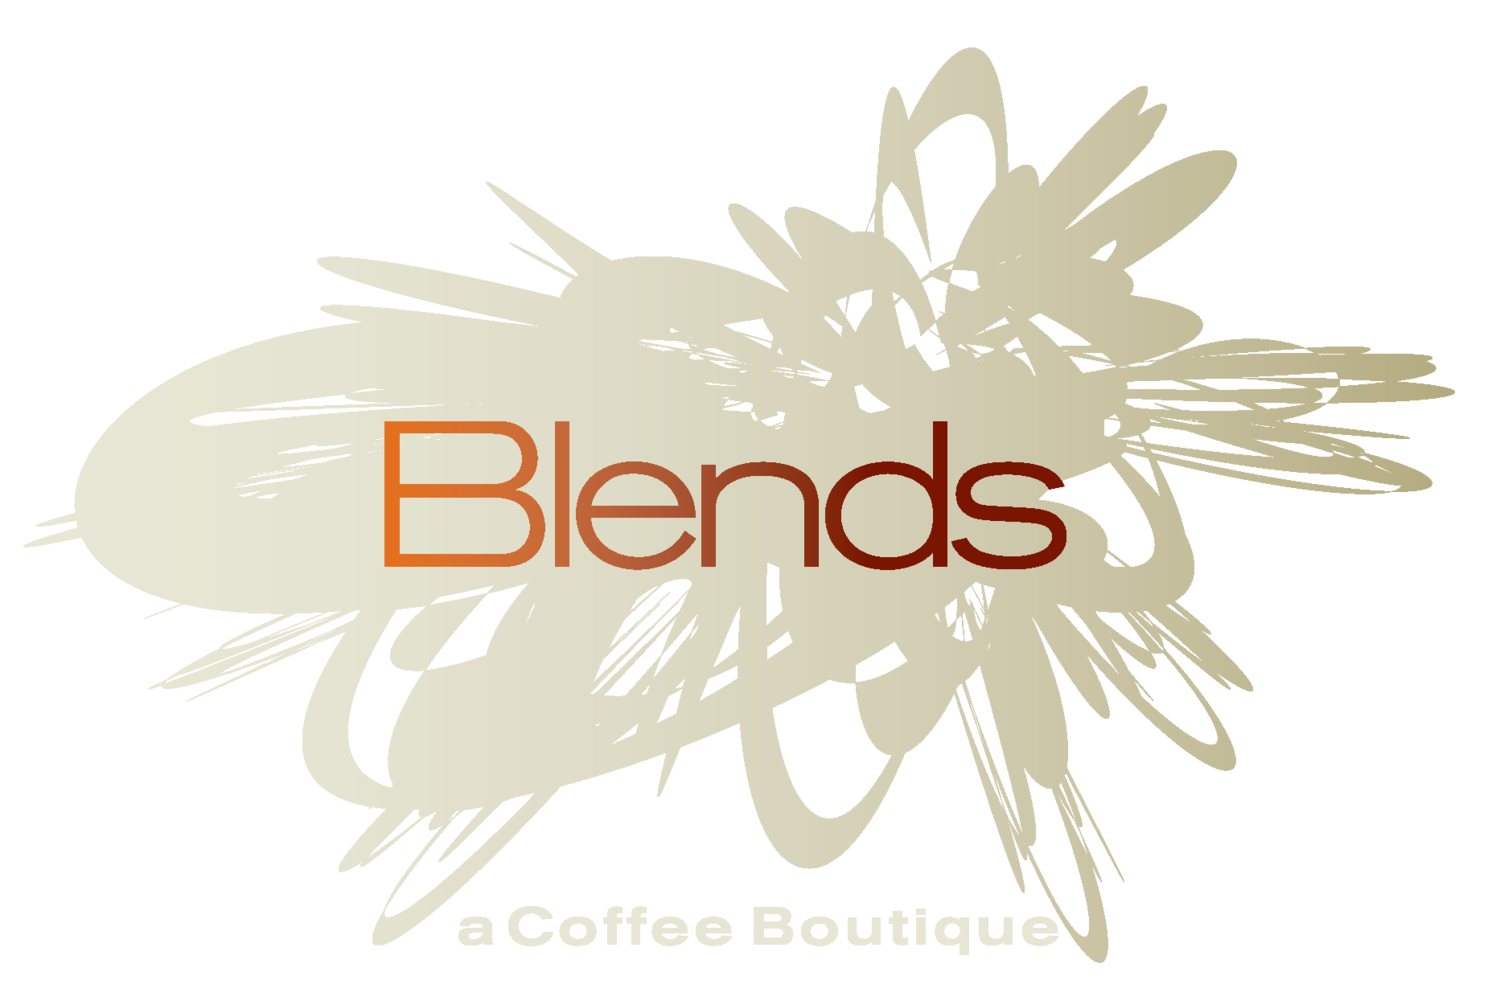 Blends a coffee boutique